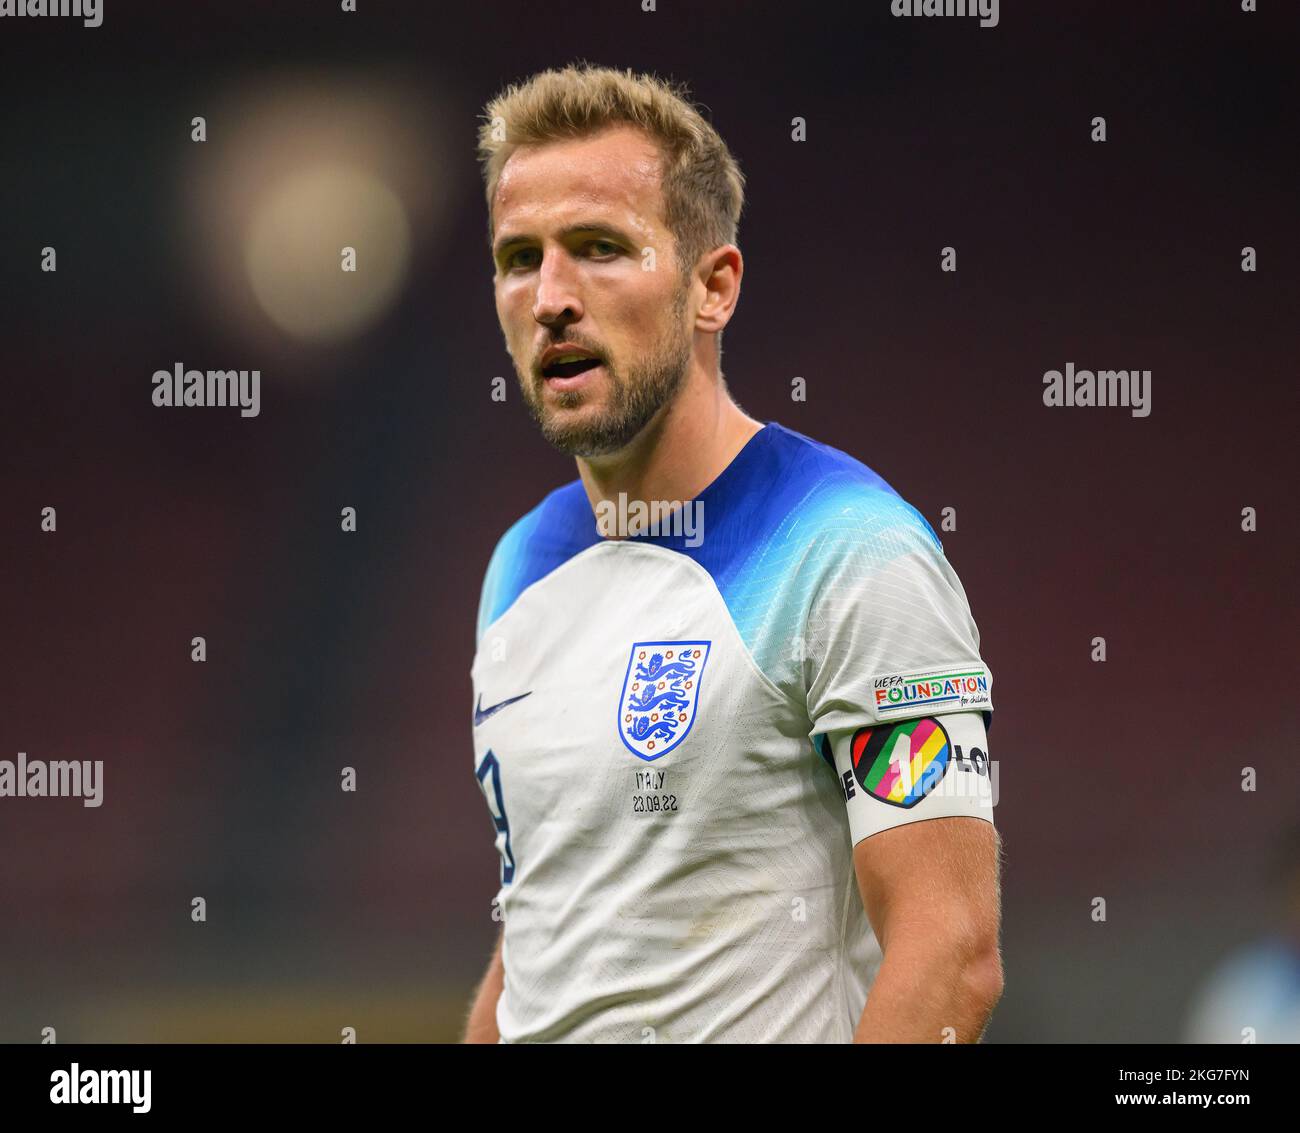 ***** FILE PHOTO ***  23 Oct 2022 - Italy v England - UEFA Nations League - Group 3 - San Siro  England Captain Harry Kane wears the One Love Rainbow Armband during the UEFA Nations League match against Italy. He has been banned from wearing the armband by FIFA during the Qatar World Cup 2022.  Picture : Mark Pain / Alamy Stock Photo